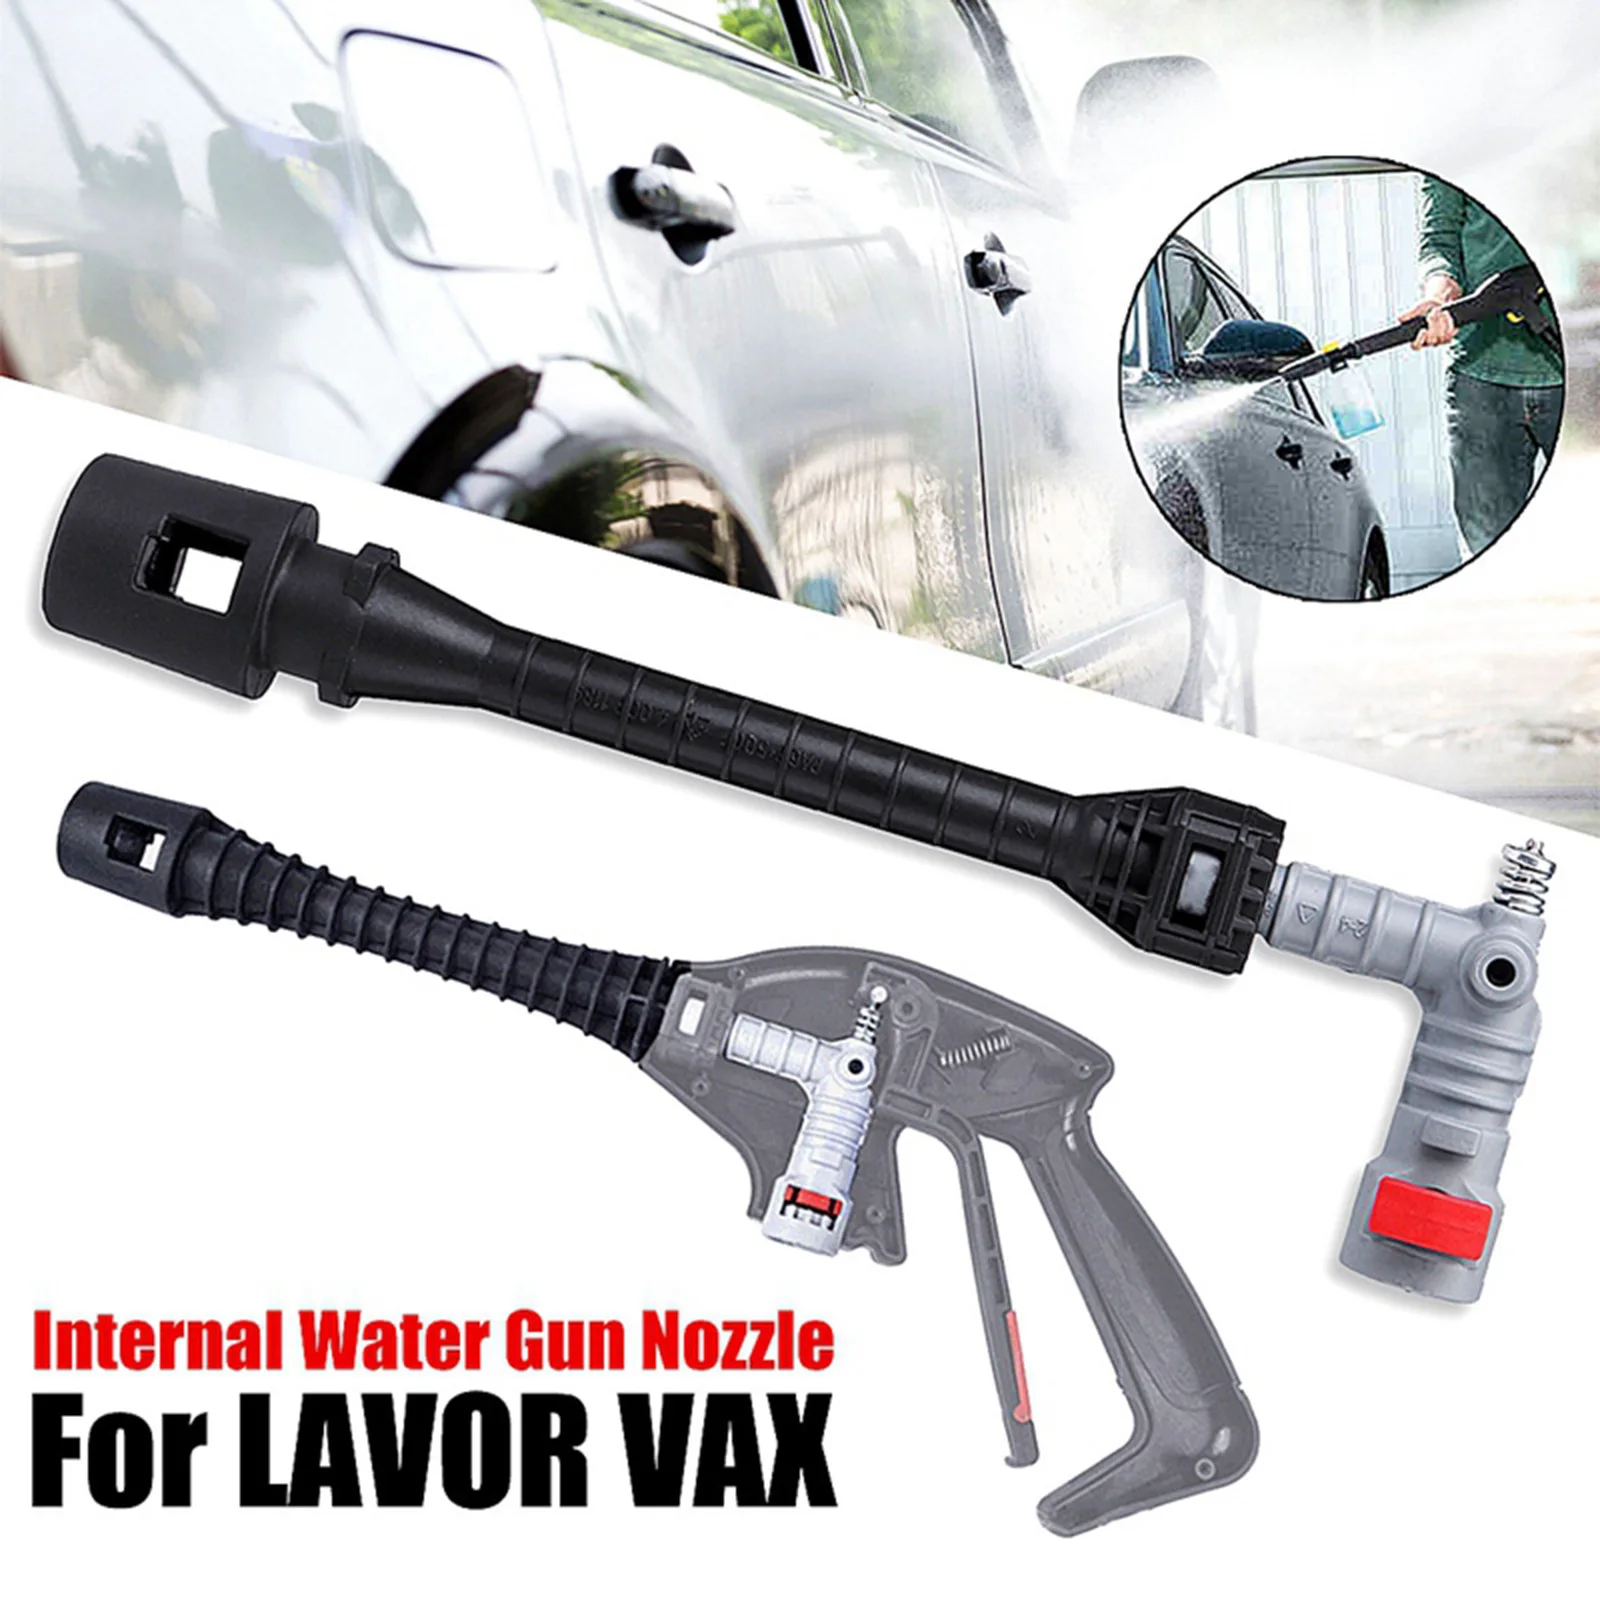 Car Water-Gun Nozzle High Pressure Washer Internal Spare Parts for Lavor Vax Car Garden Cleaning Washing Tools Replacement